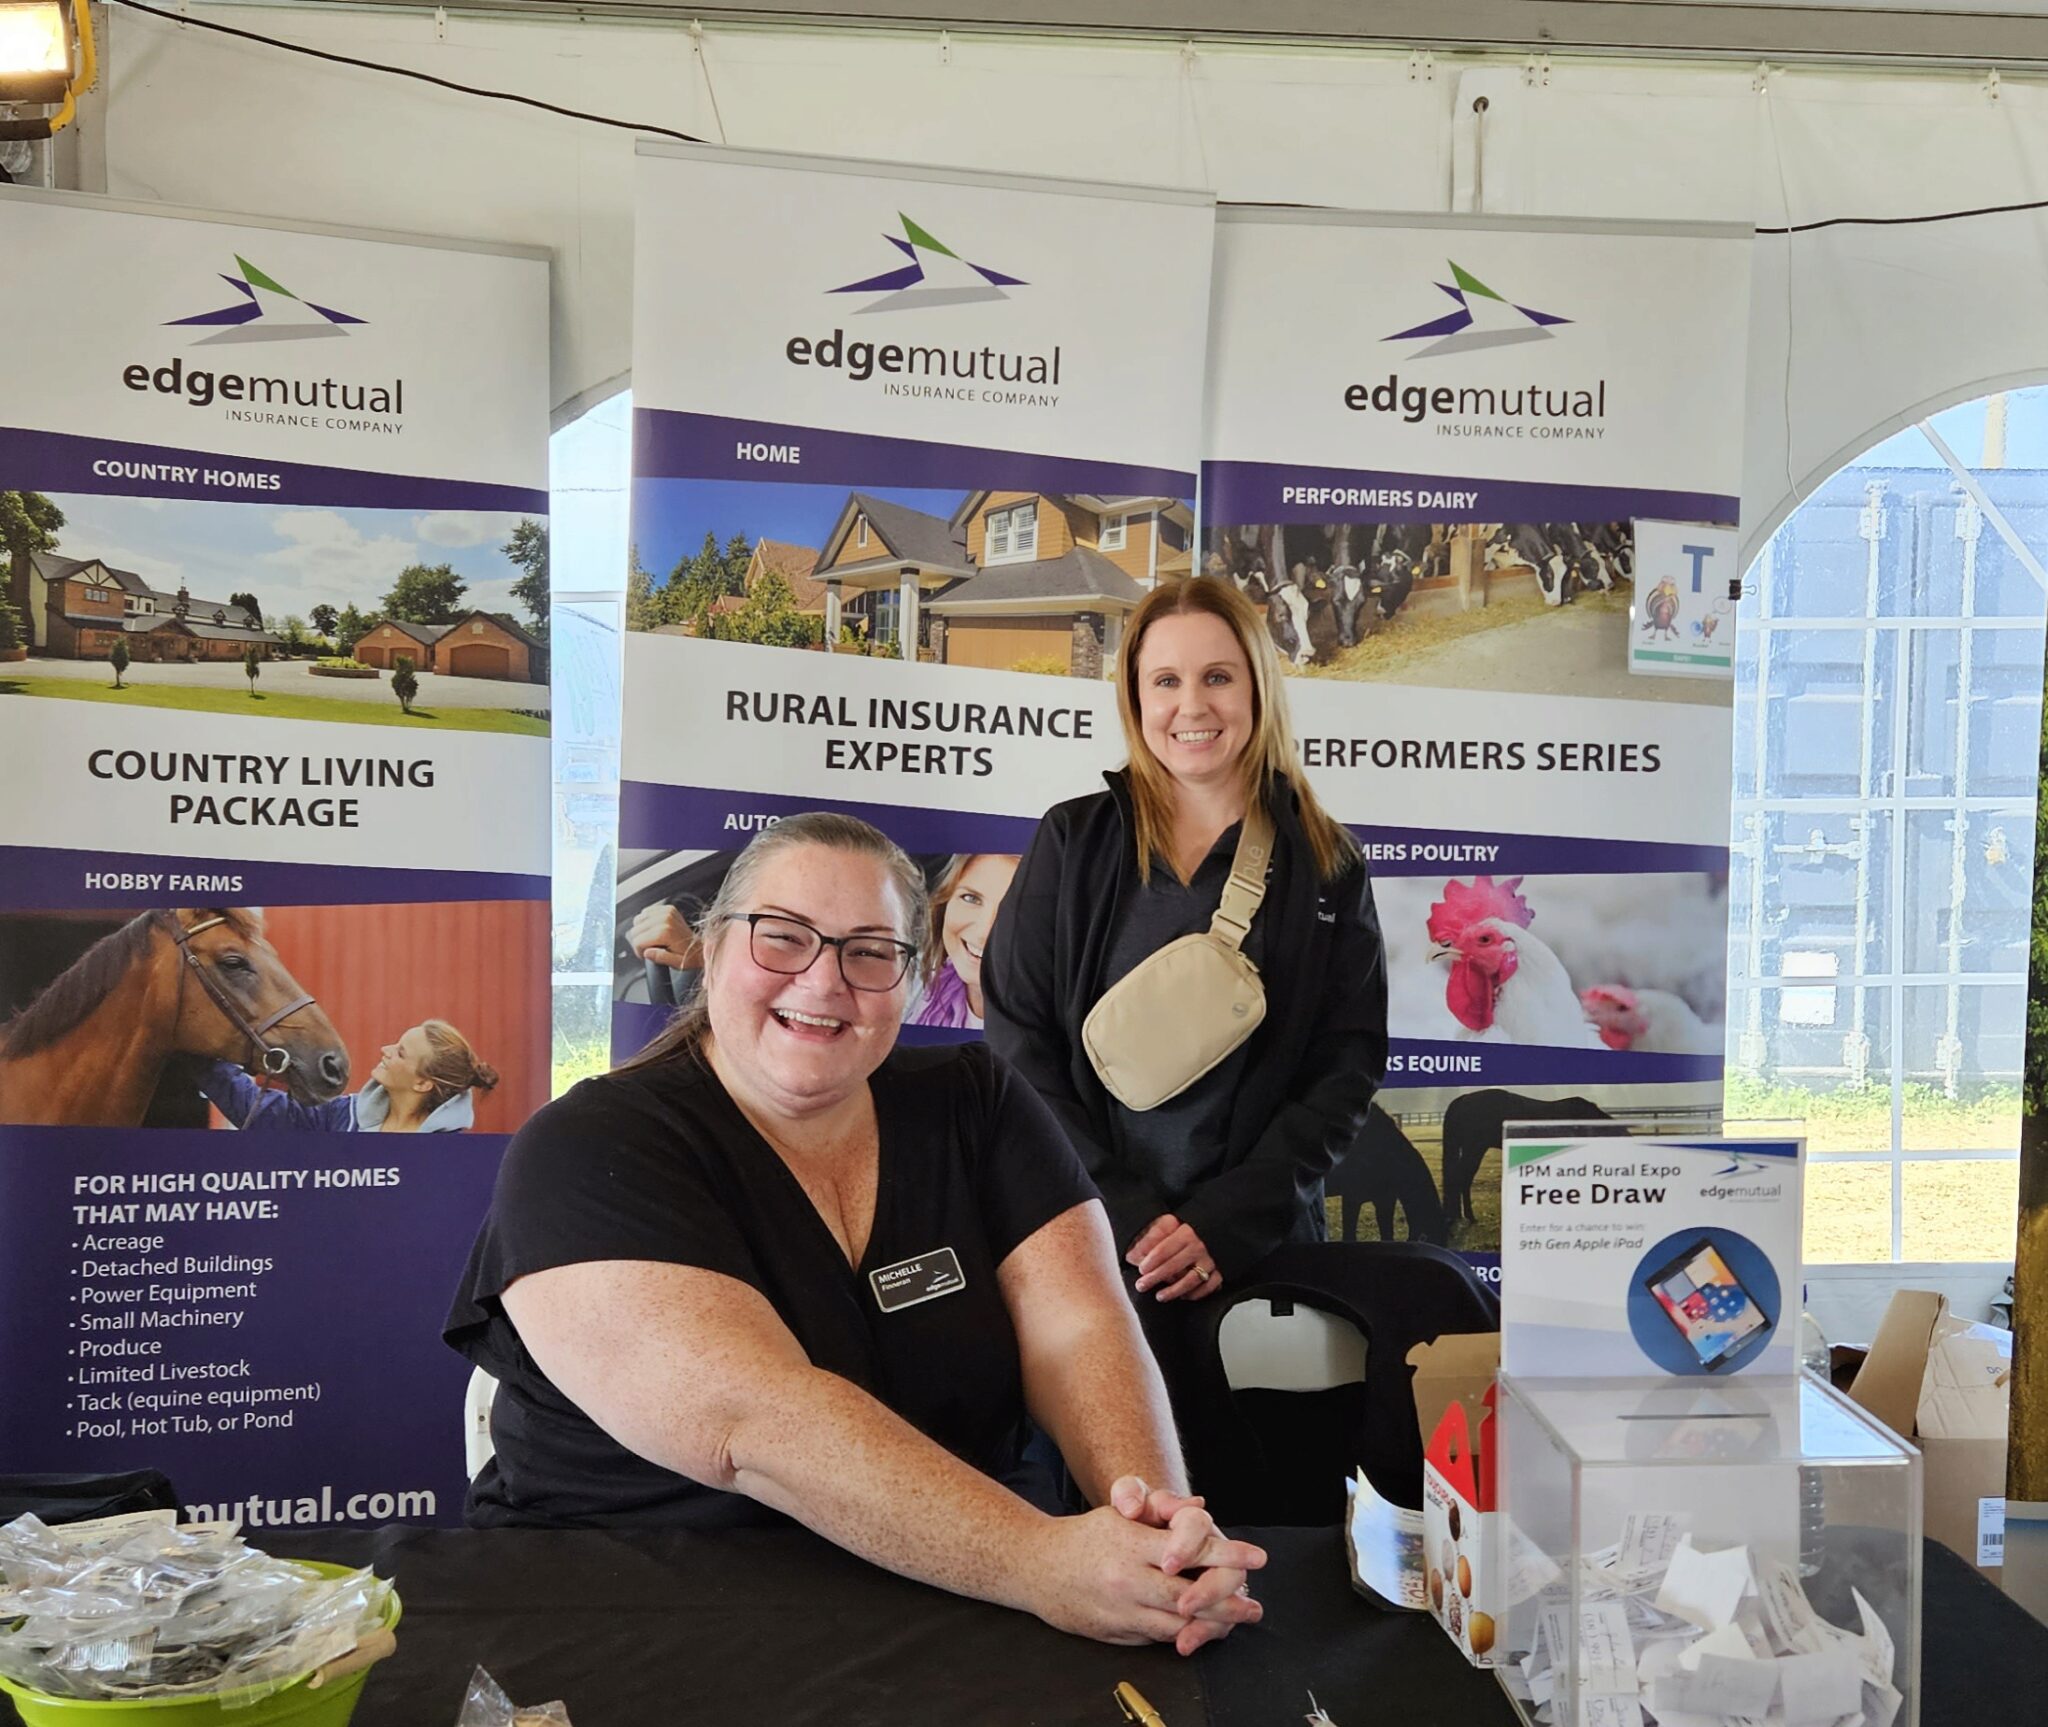 Edge employees Michelle Finneran and Robyn Stadnik volunteering in the Ontario Mutuals tent.